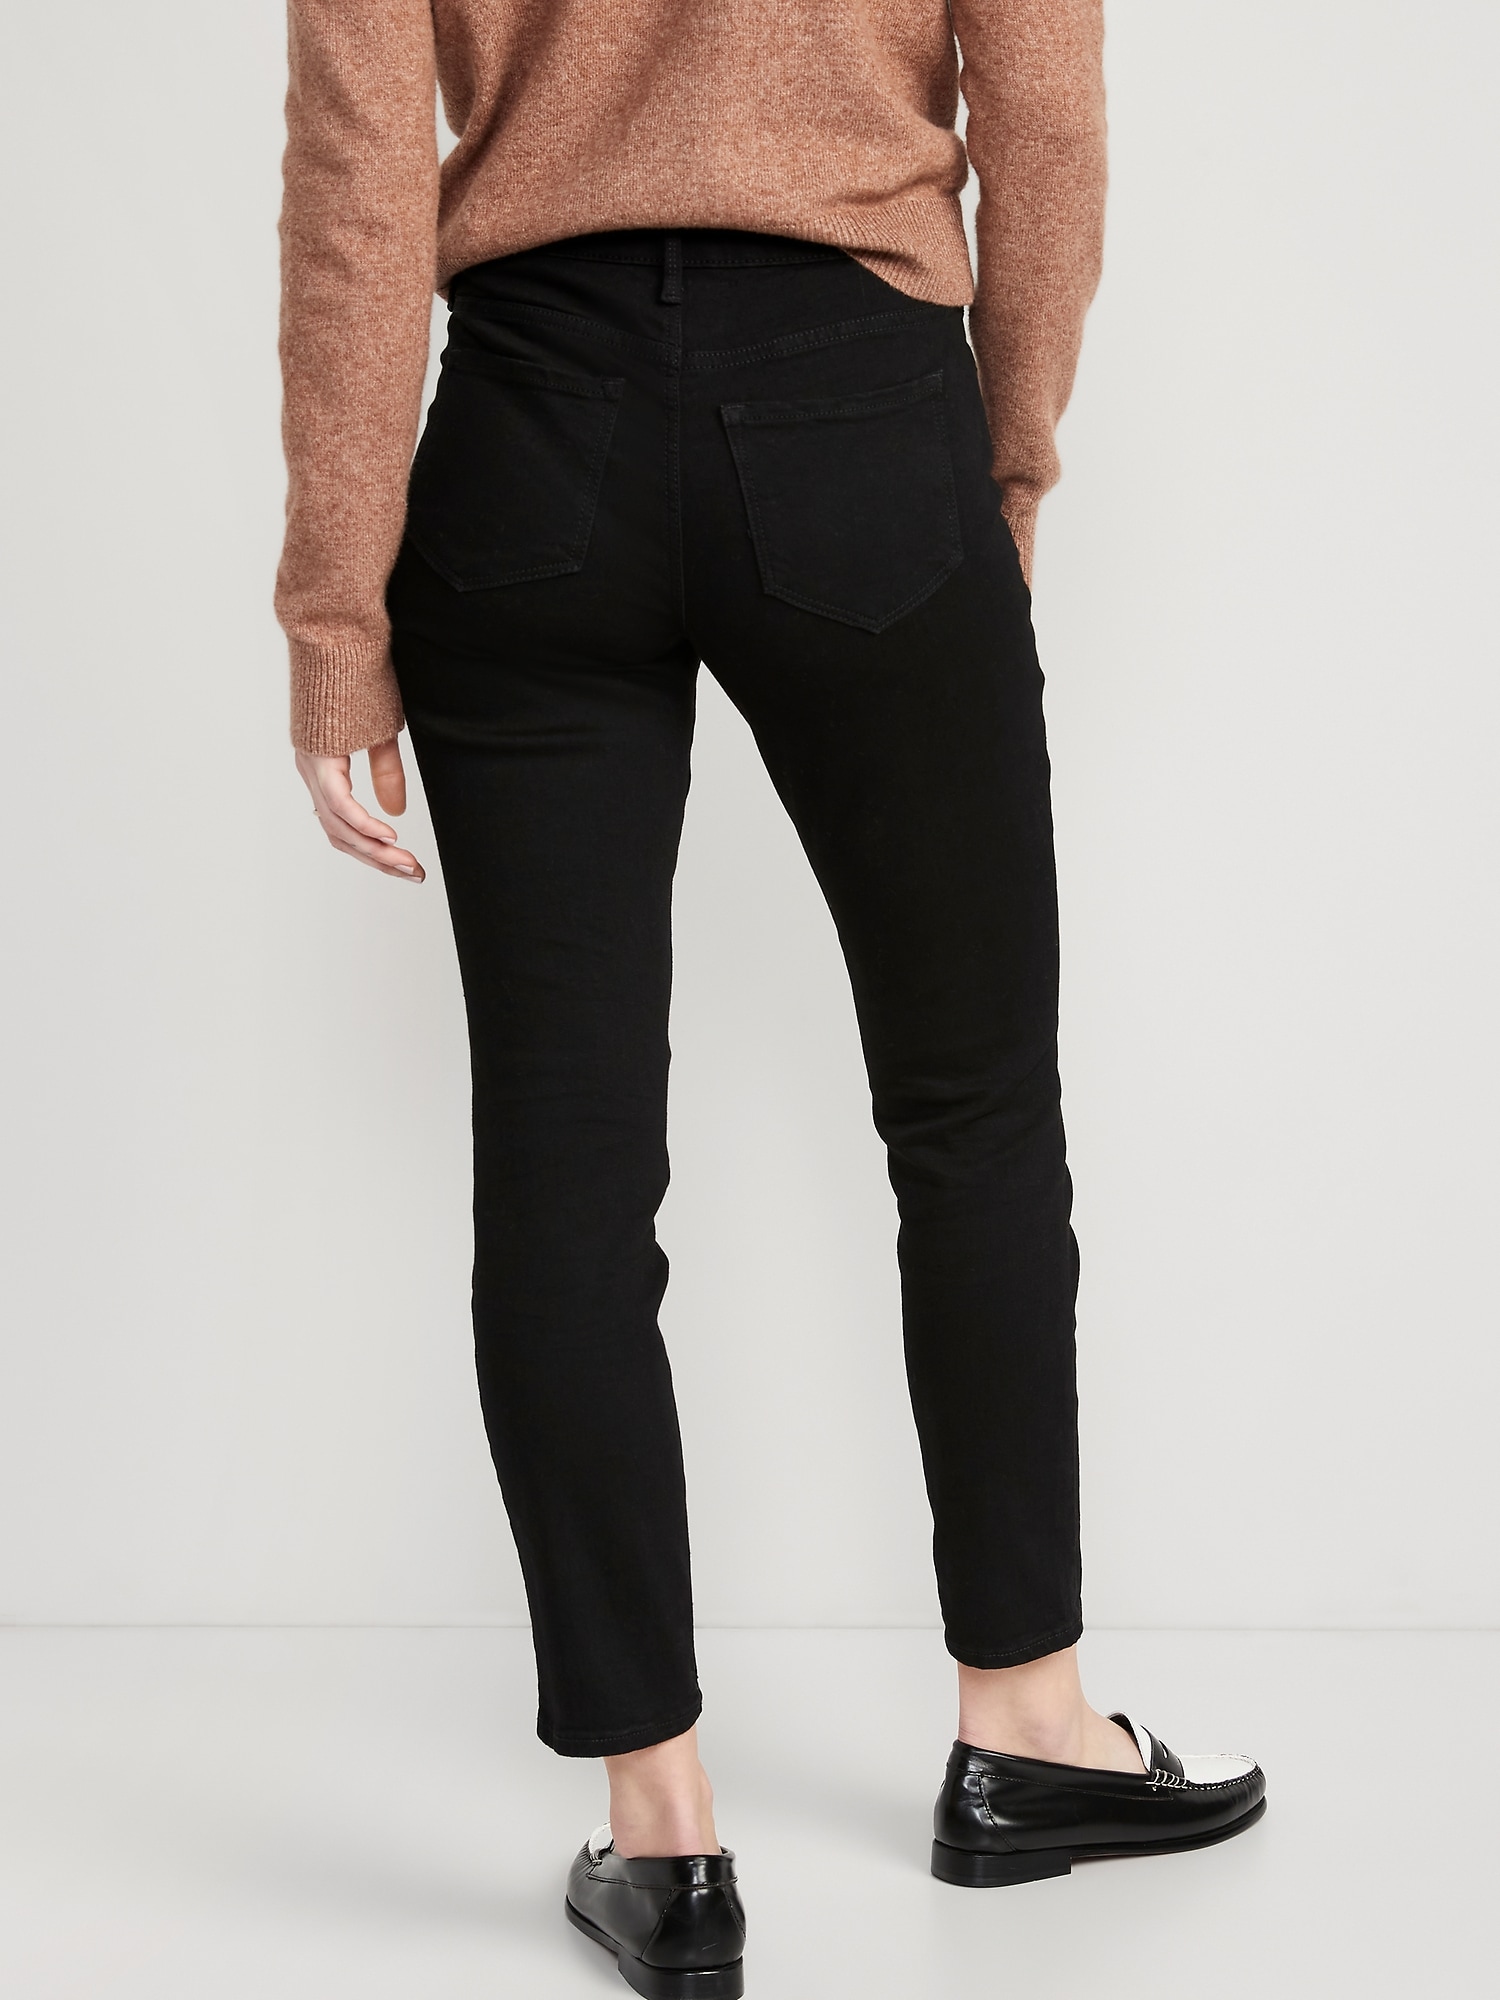 Black power slim jeans N°1 : Jeans & Trousers, ready to wear for